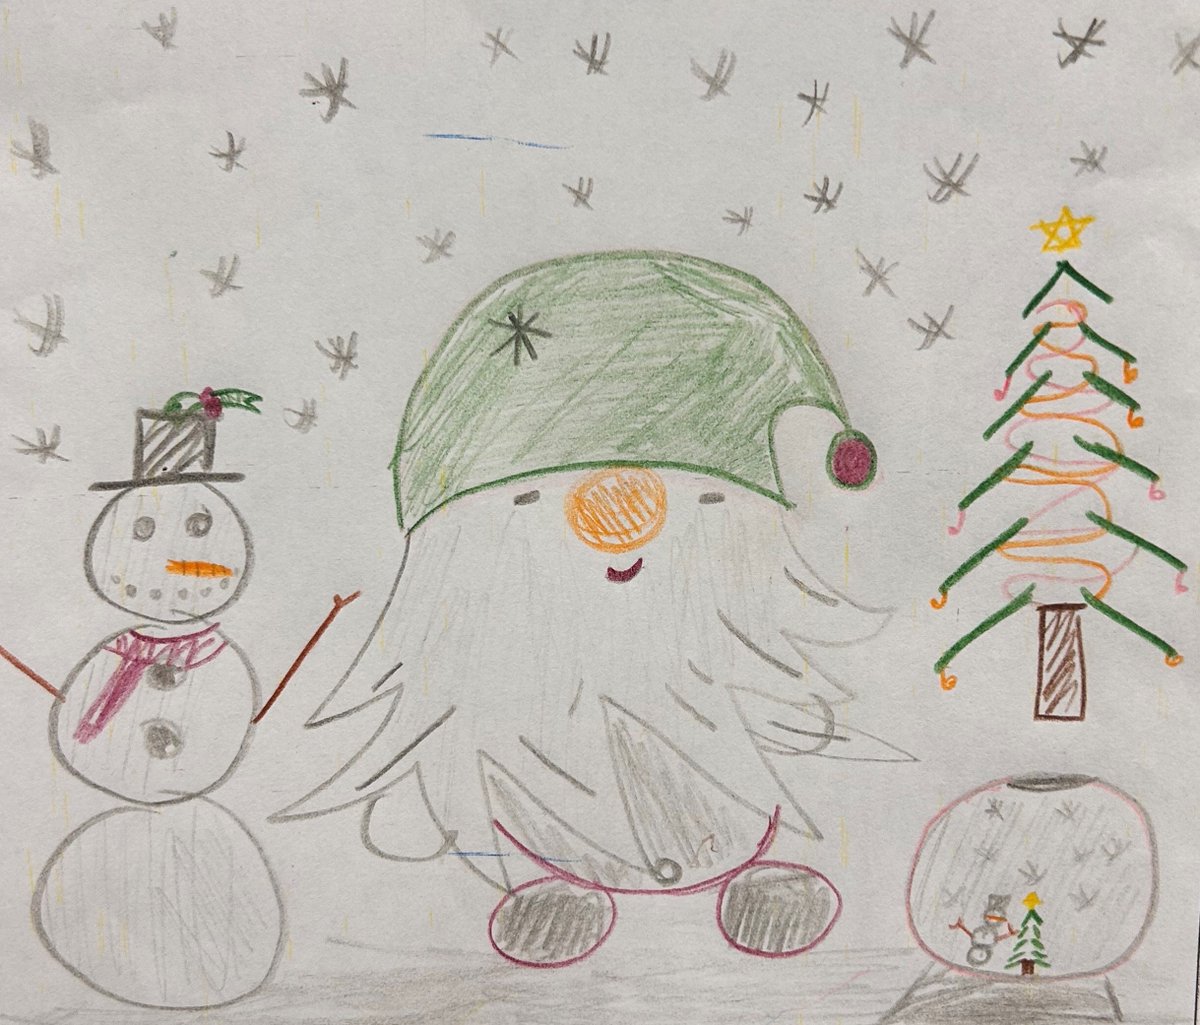 Congratulations to this age category winner who has drawn festive friends getting ready to help Santa! ⛄️🎄 #Chaplaincy @SATHWMpaeds @sathNHS